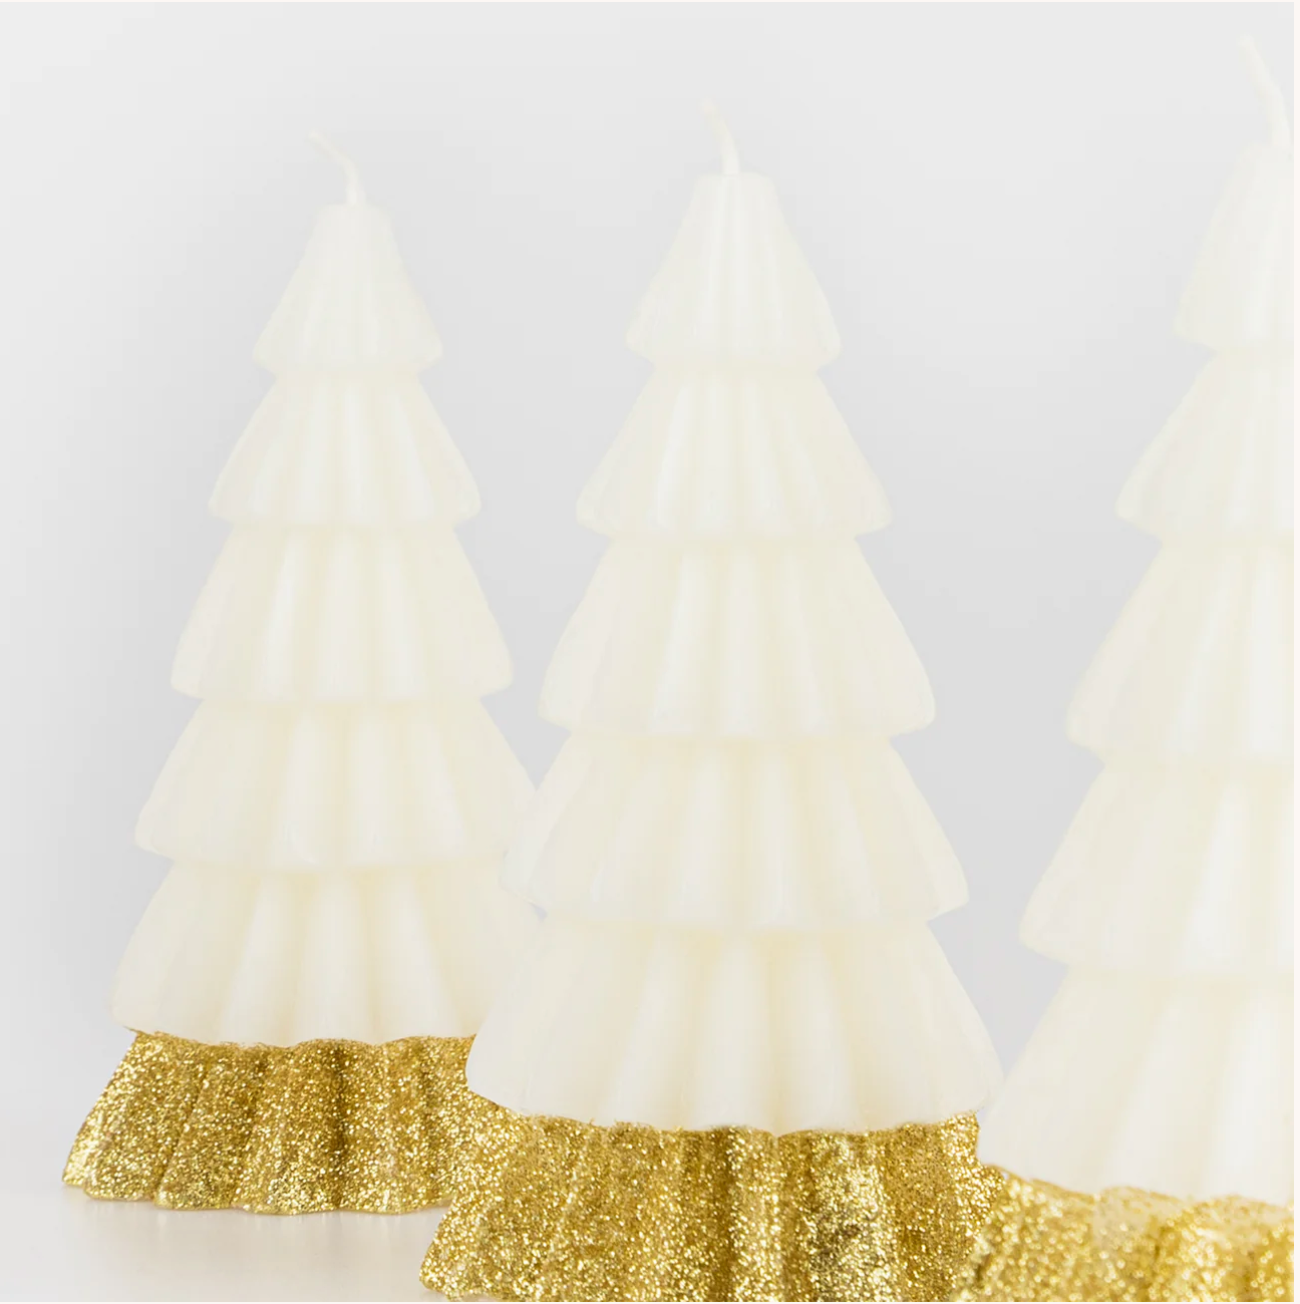 Ivory Tree Candles (x 3)